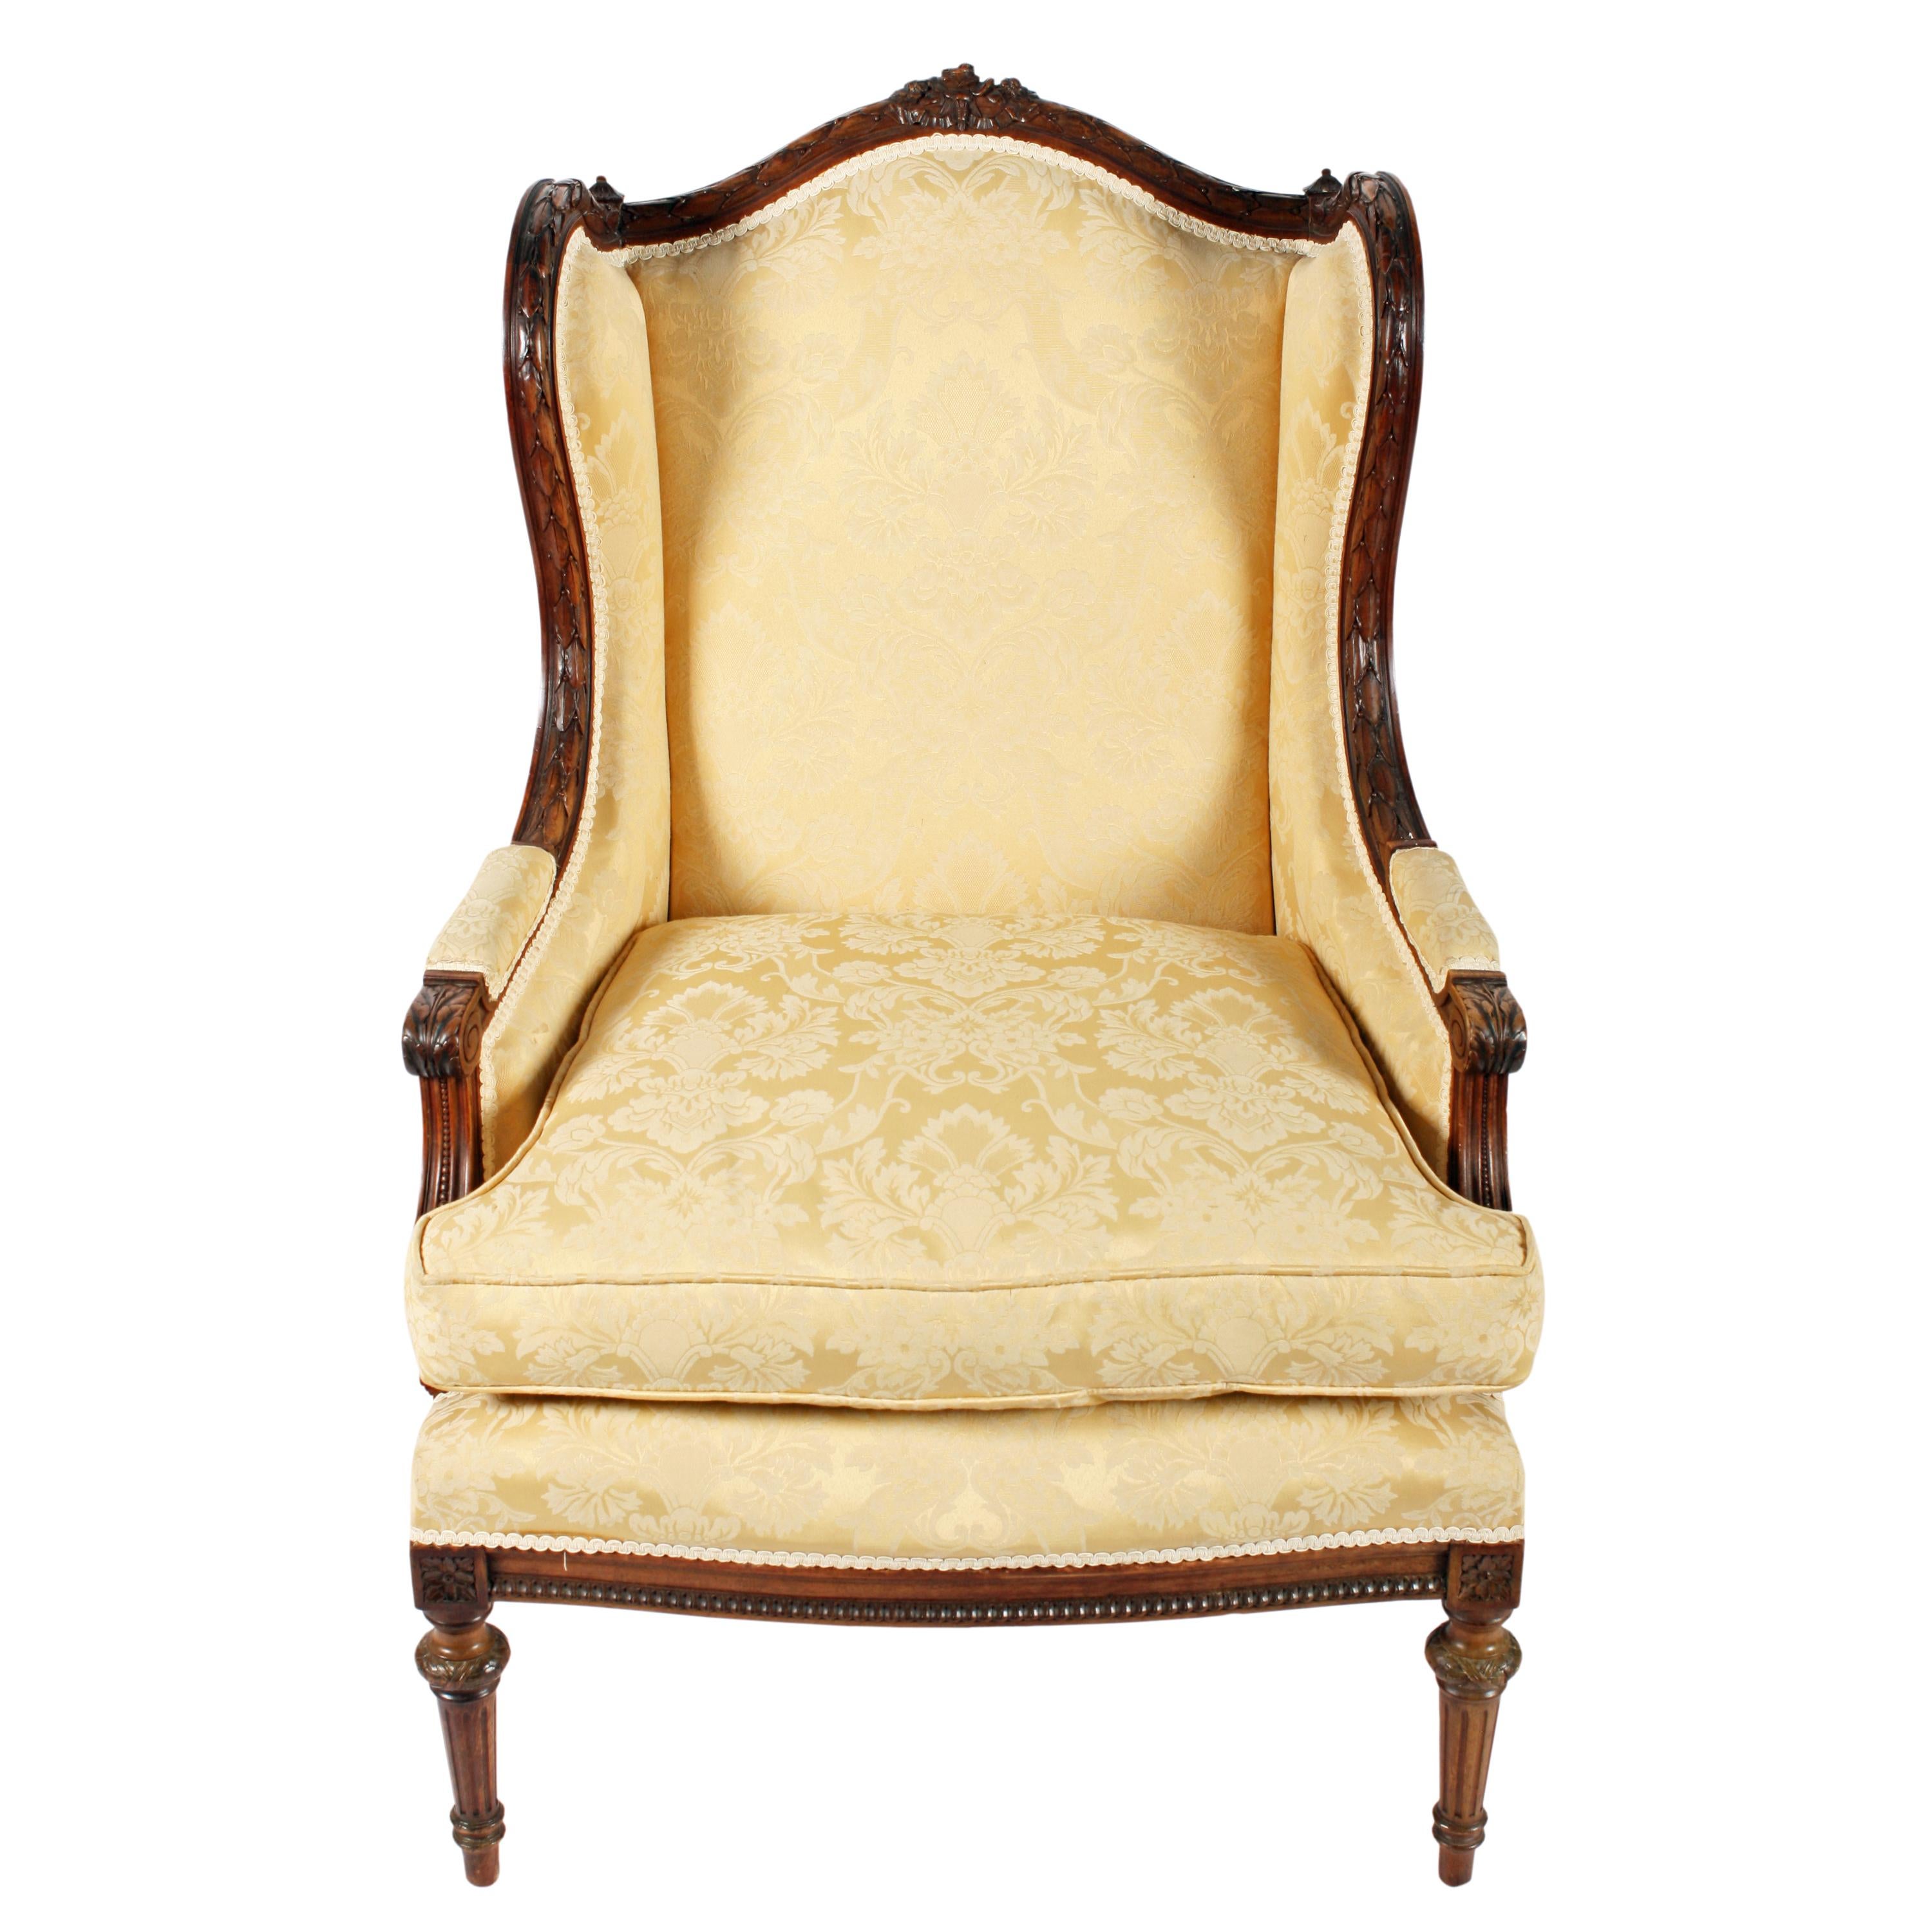 19th Century French Walnut Fauteuil Upholstered Easy chair In Good Condition For Sale In Newcastle Upon Tyne, GB